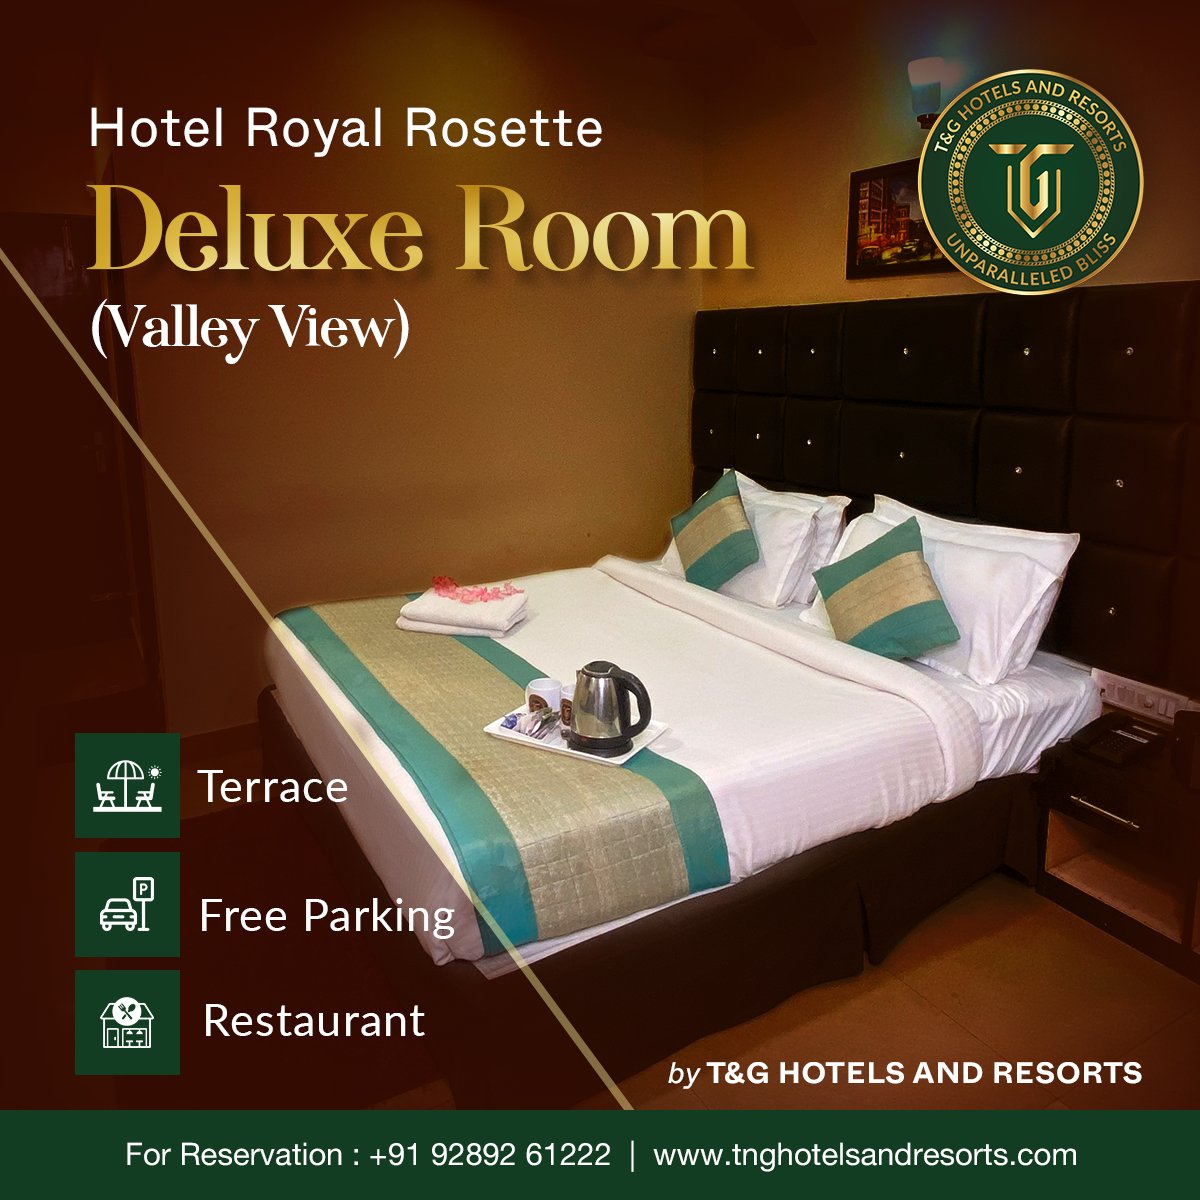 Indulge in luxury and breathtaking views at Hotel Royal Rosette. Our Deluxe Rooms offer the perfect blend of comfort.
For more info visit : bit.ly/3IMEjzd or call us : +91 9289261222
#tandghotelsandresorts #stayinbhimtal #bhimtal #valleyview #deluxeroom #uttarakhand